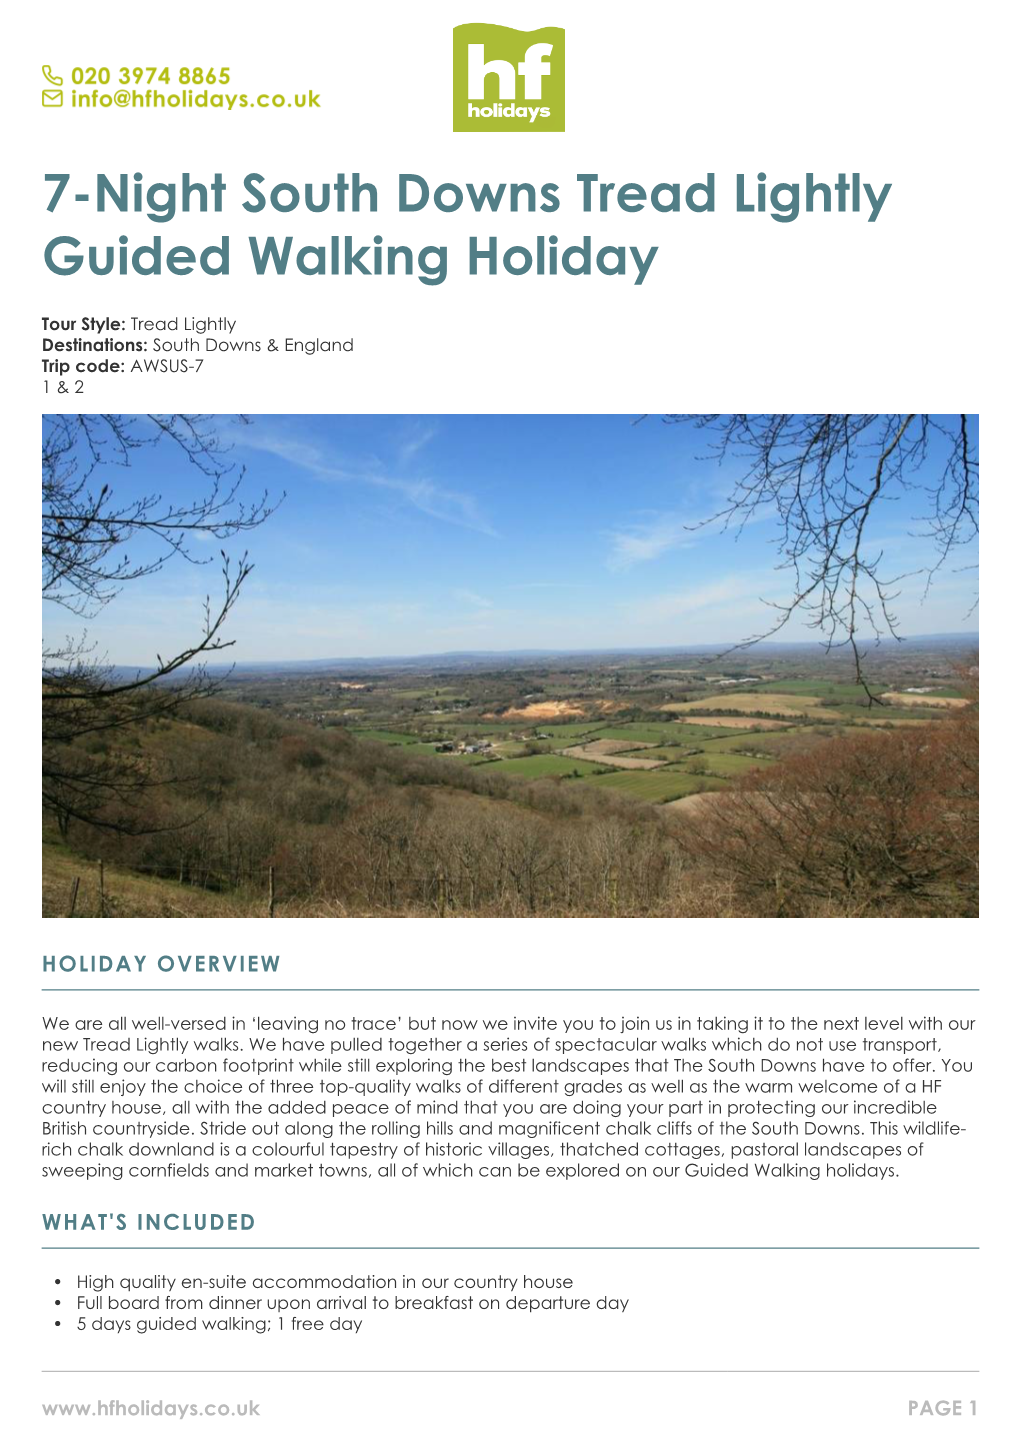 7-Night South Downs Tread Lightly Guided Walking Holiday